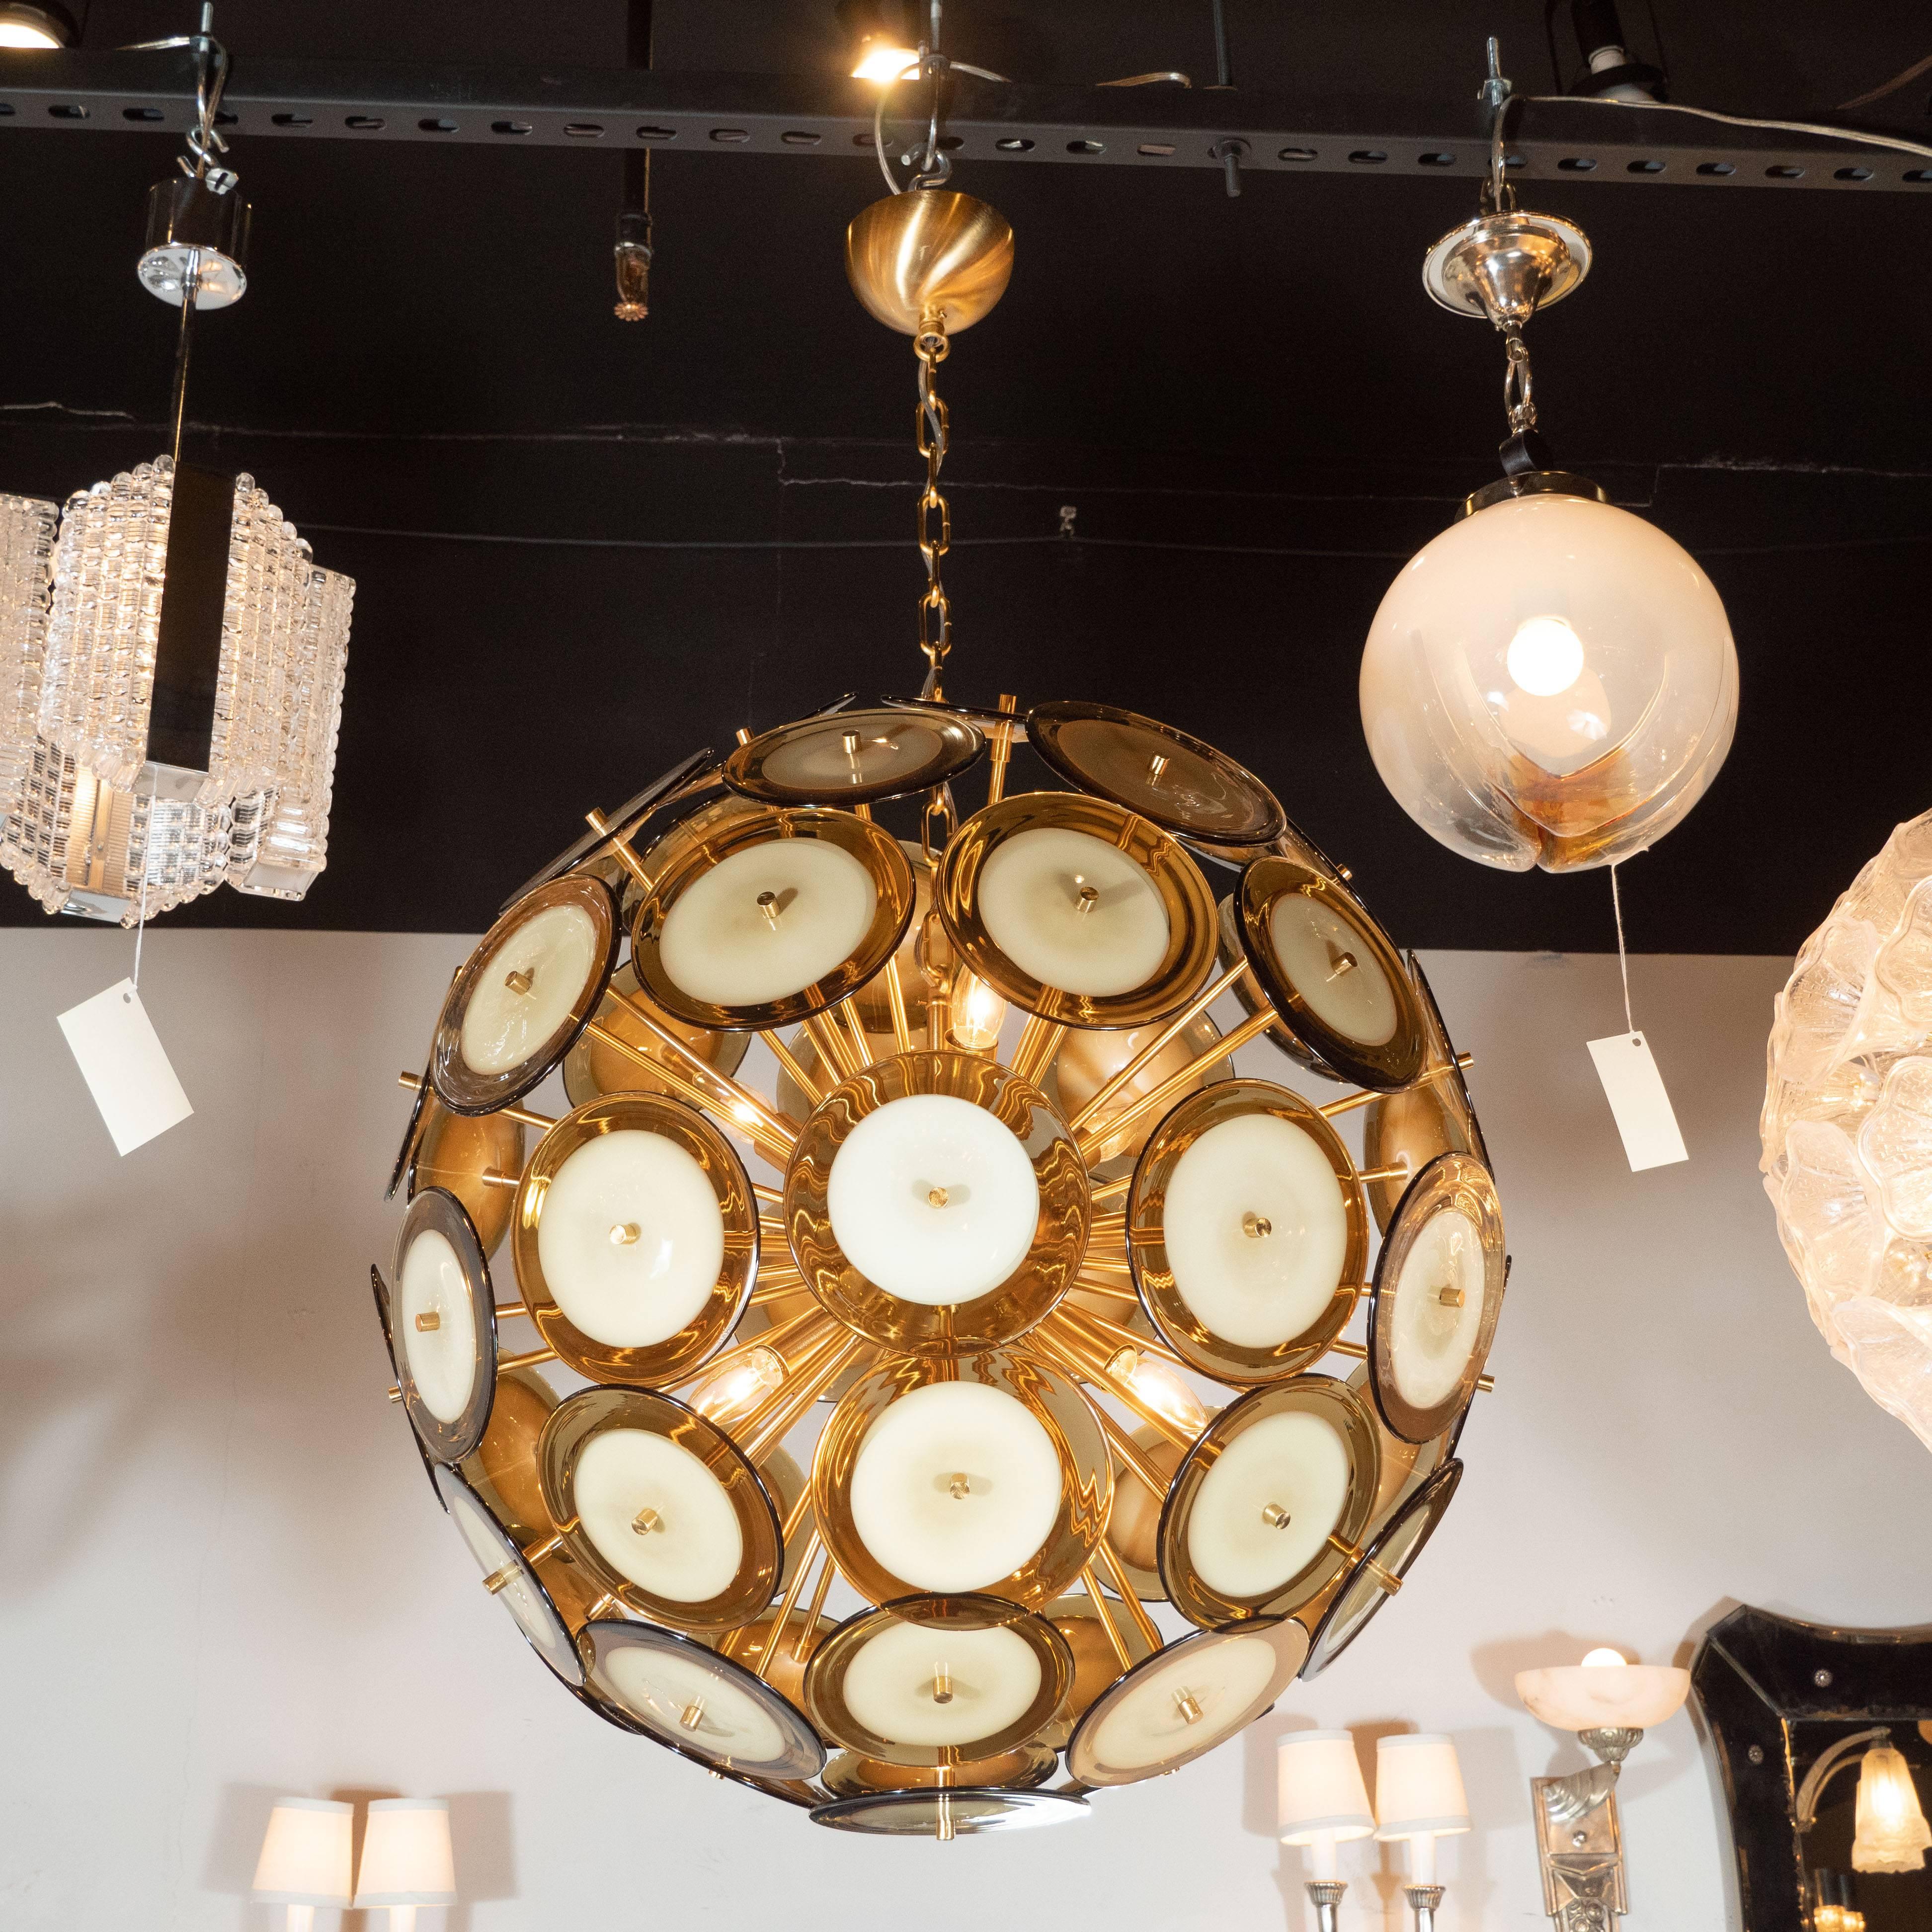 This sophisticated and stunning chandelier was realized in Murano, Italy- the islands off the coast of Venice renowned for centuries for their superlative glass production. It features an abundance of polished brass rods emanating from a central orb